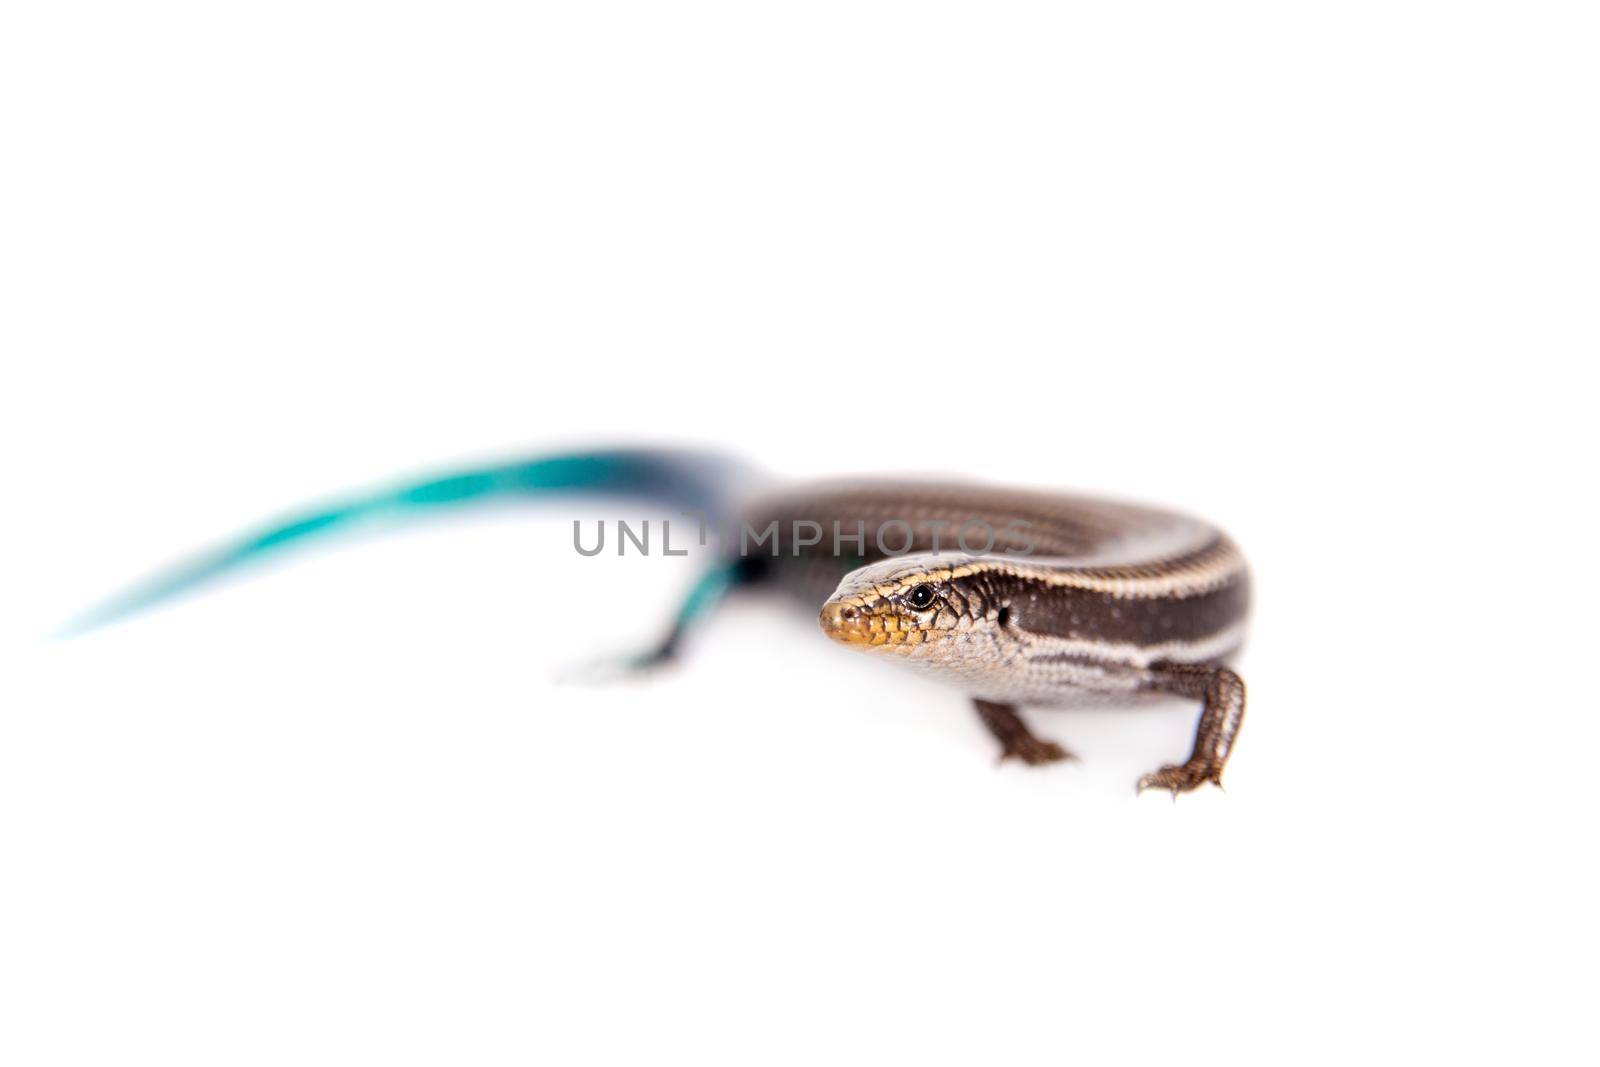 Gran Canaria skink, Chalcides sexlineatus, isolated on white background